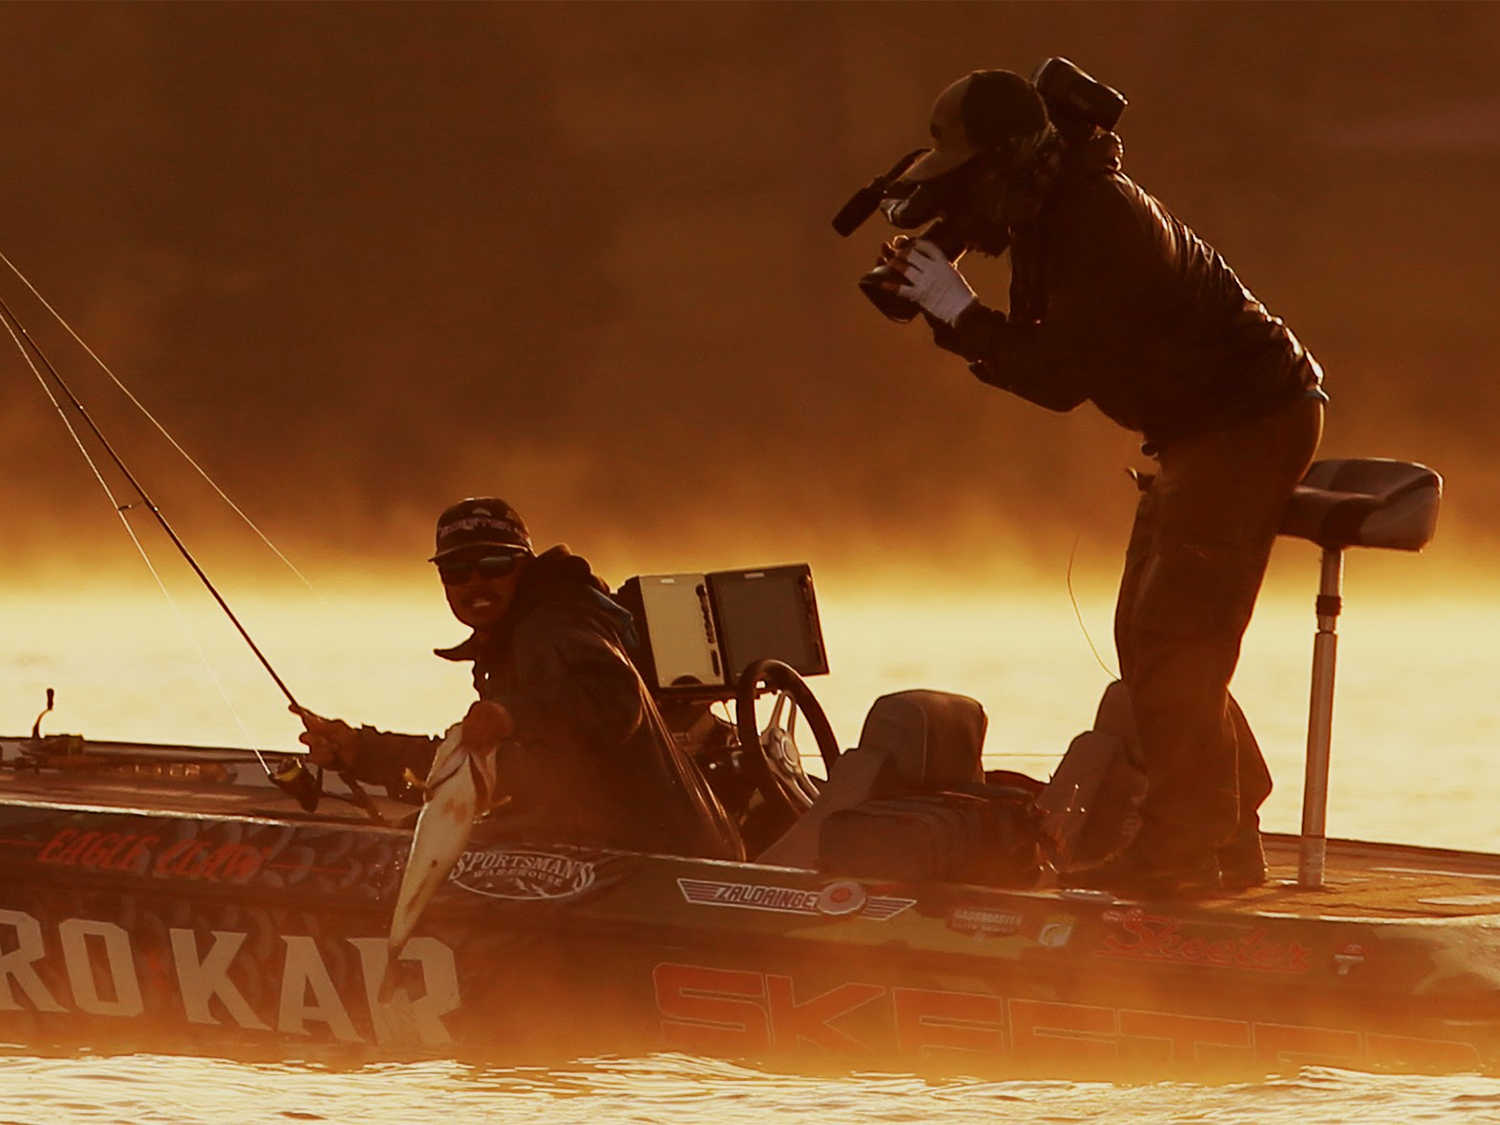 A bass angler pulling a fish into a boat while a camera man films.